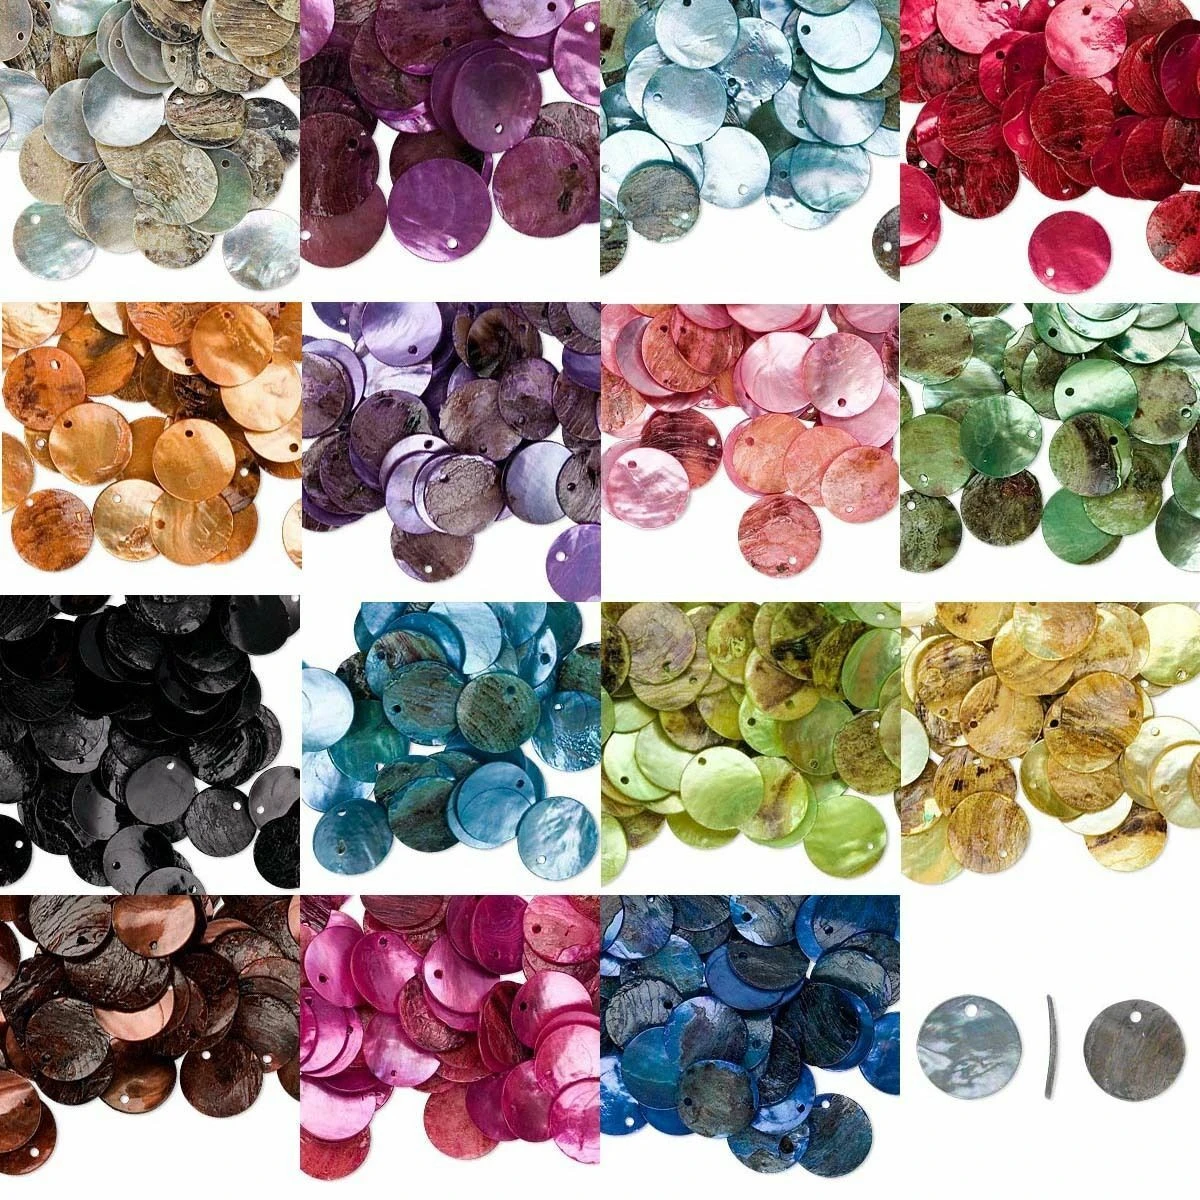 50pcs Flat Round Shell Beads Spacer Bead for Jewelry Making Bracelet Necklace DIY Pendant Home Decor Mussel Shell Coin Charms